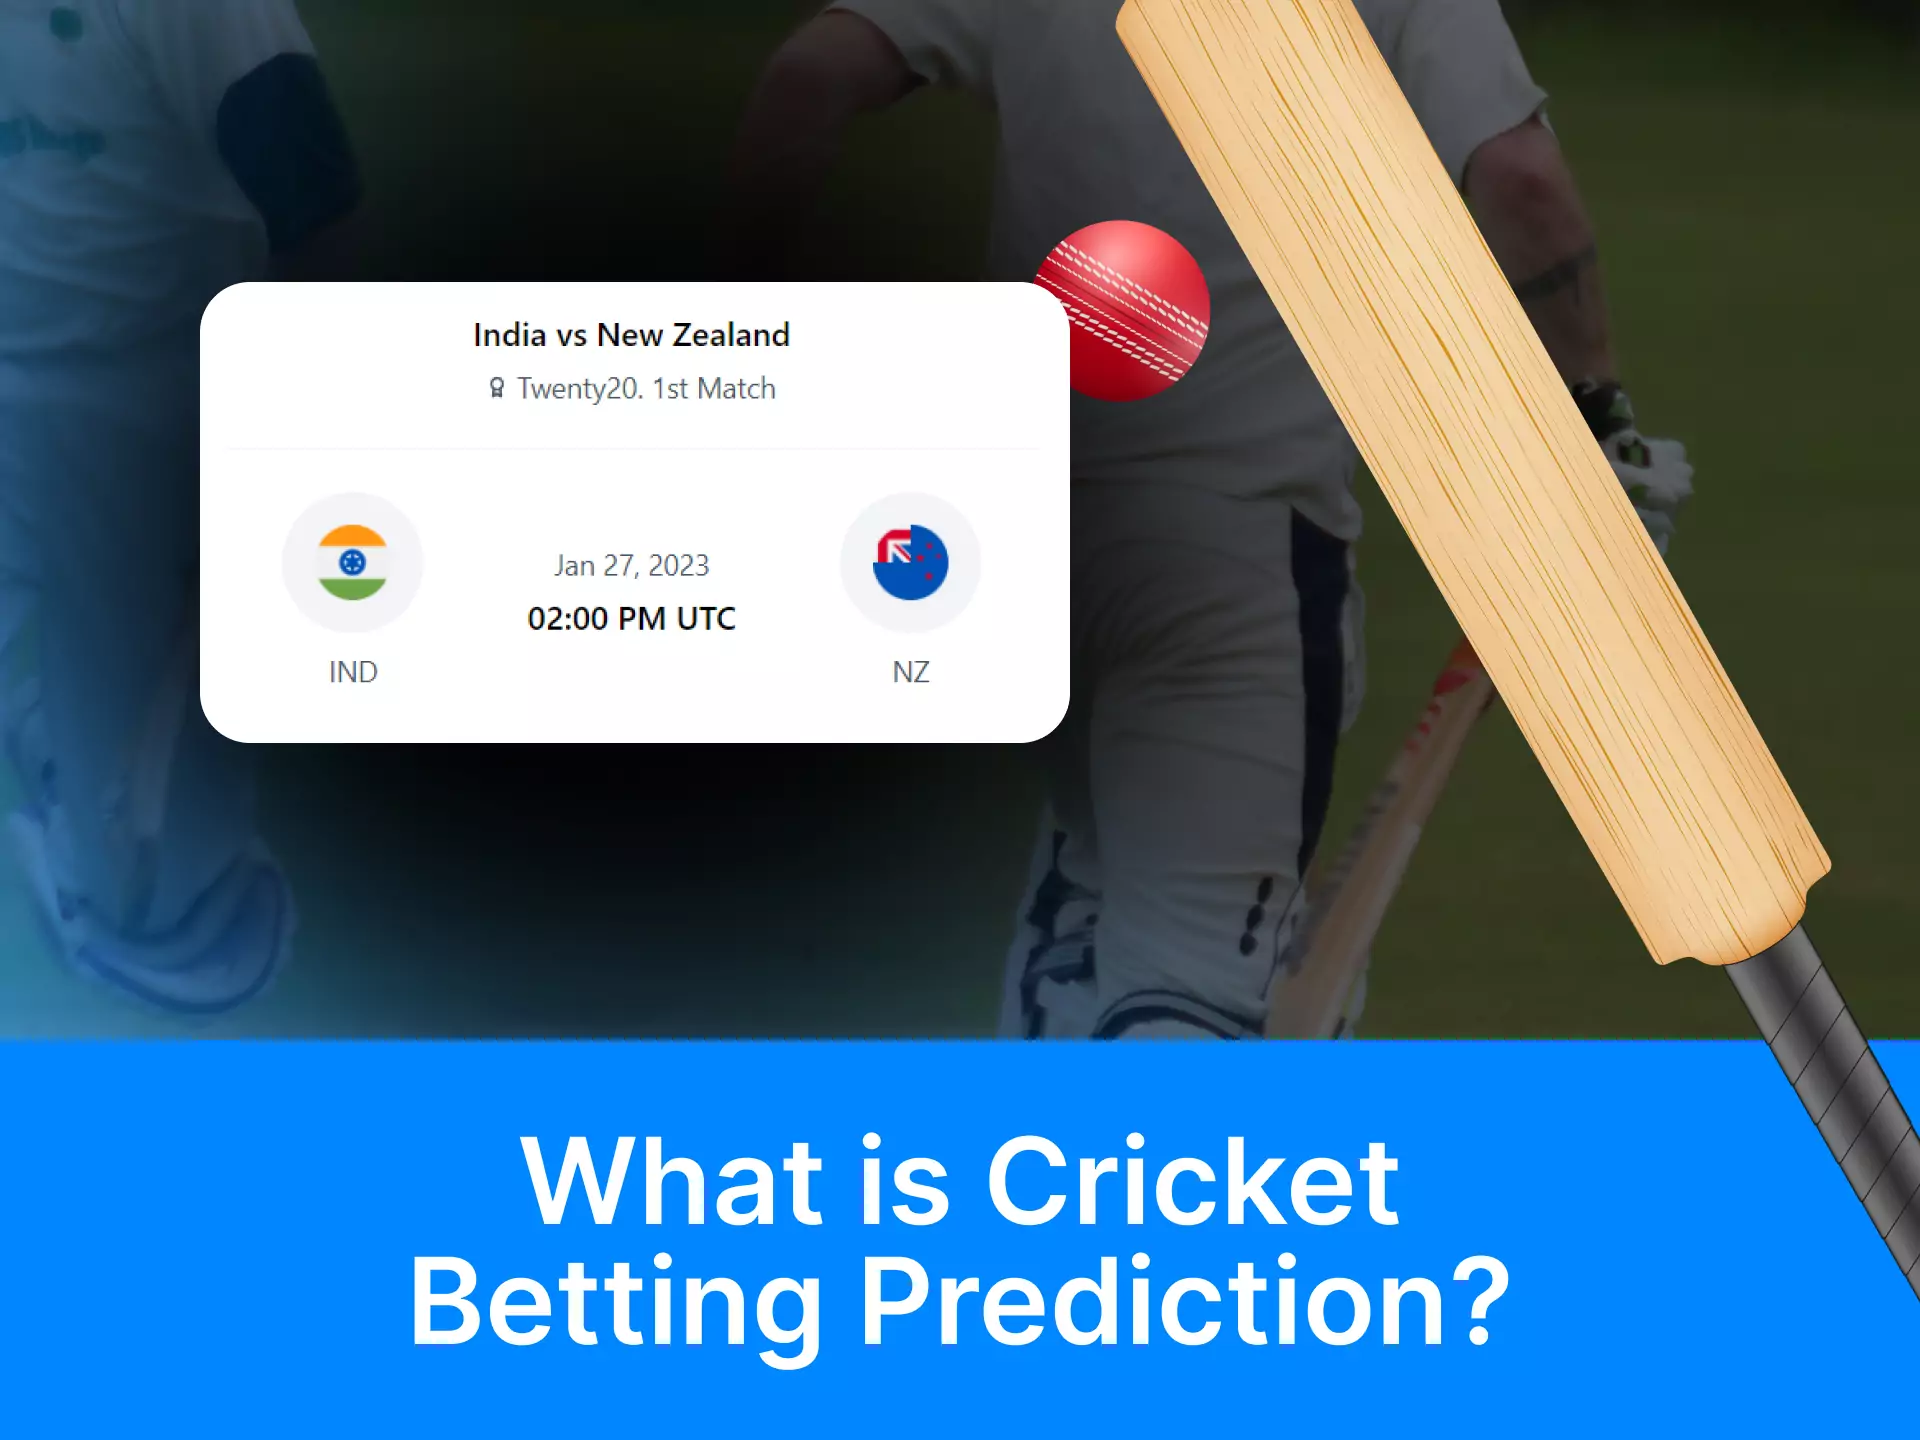 Read it and find out what a prediction is for a bet on a game.